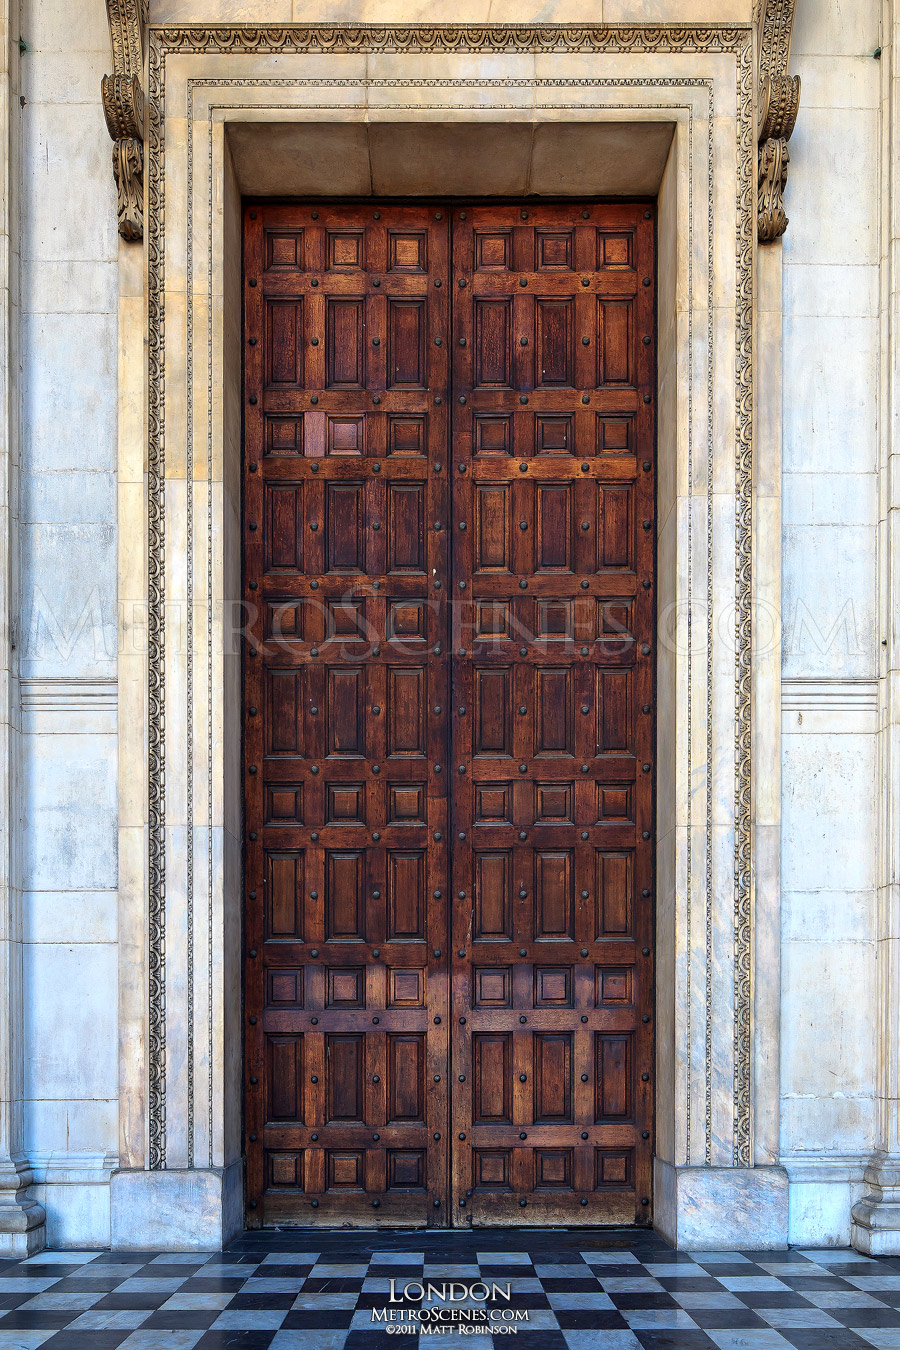 Giant door of St. Paul's Cathedral